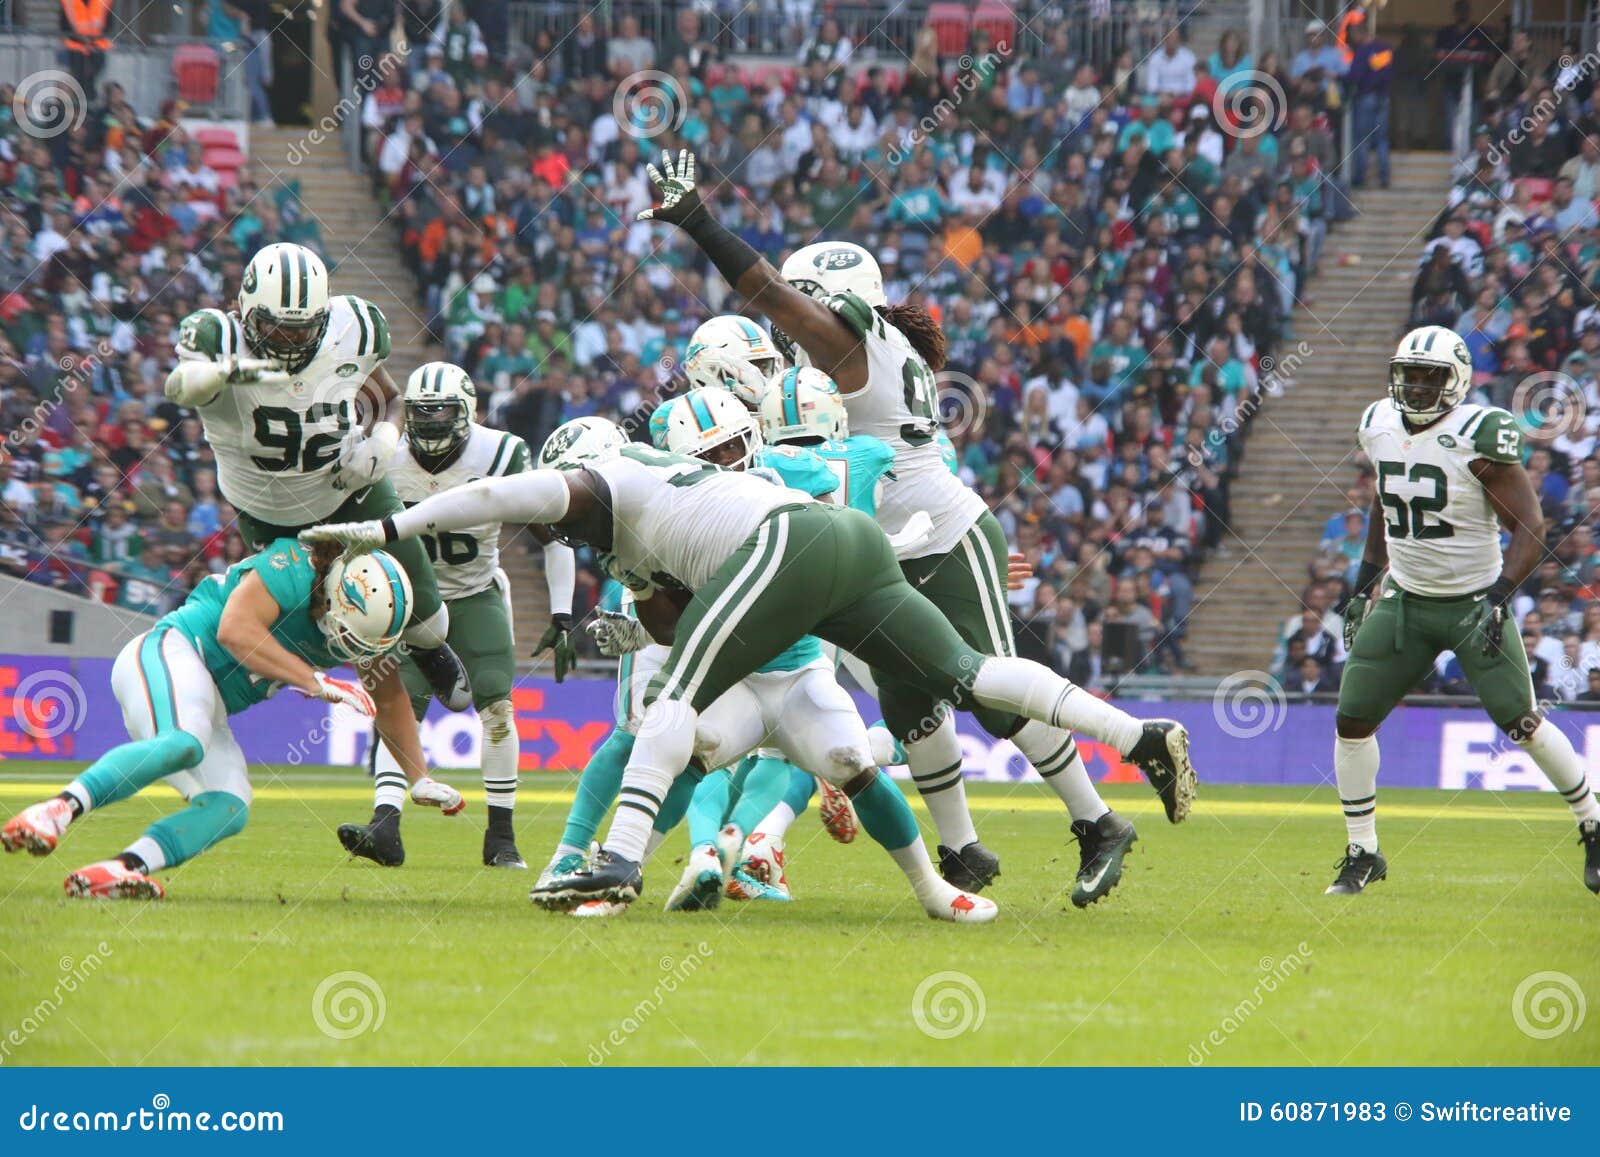 New York Jets International Series Game Versus the Miami Dolphins at Wembley  Stadium Editorial Photography - Image of atmosphere, international: 60876167